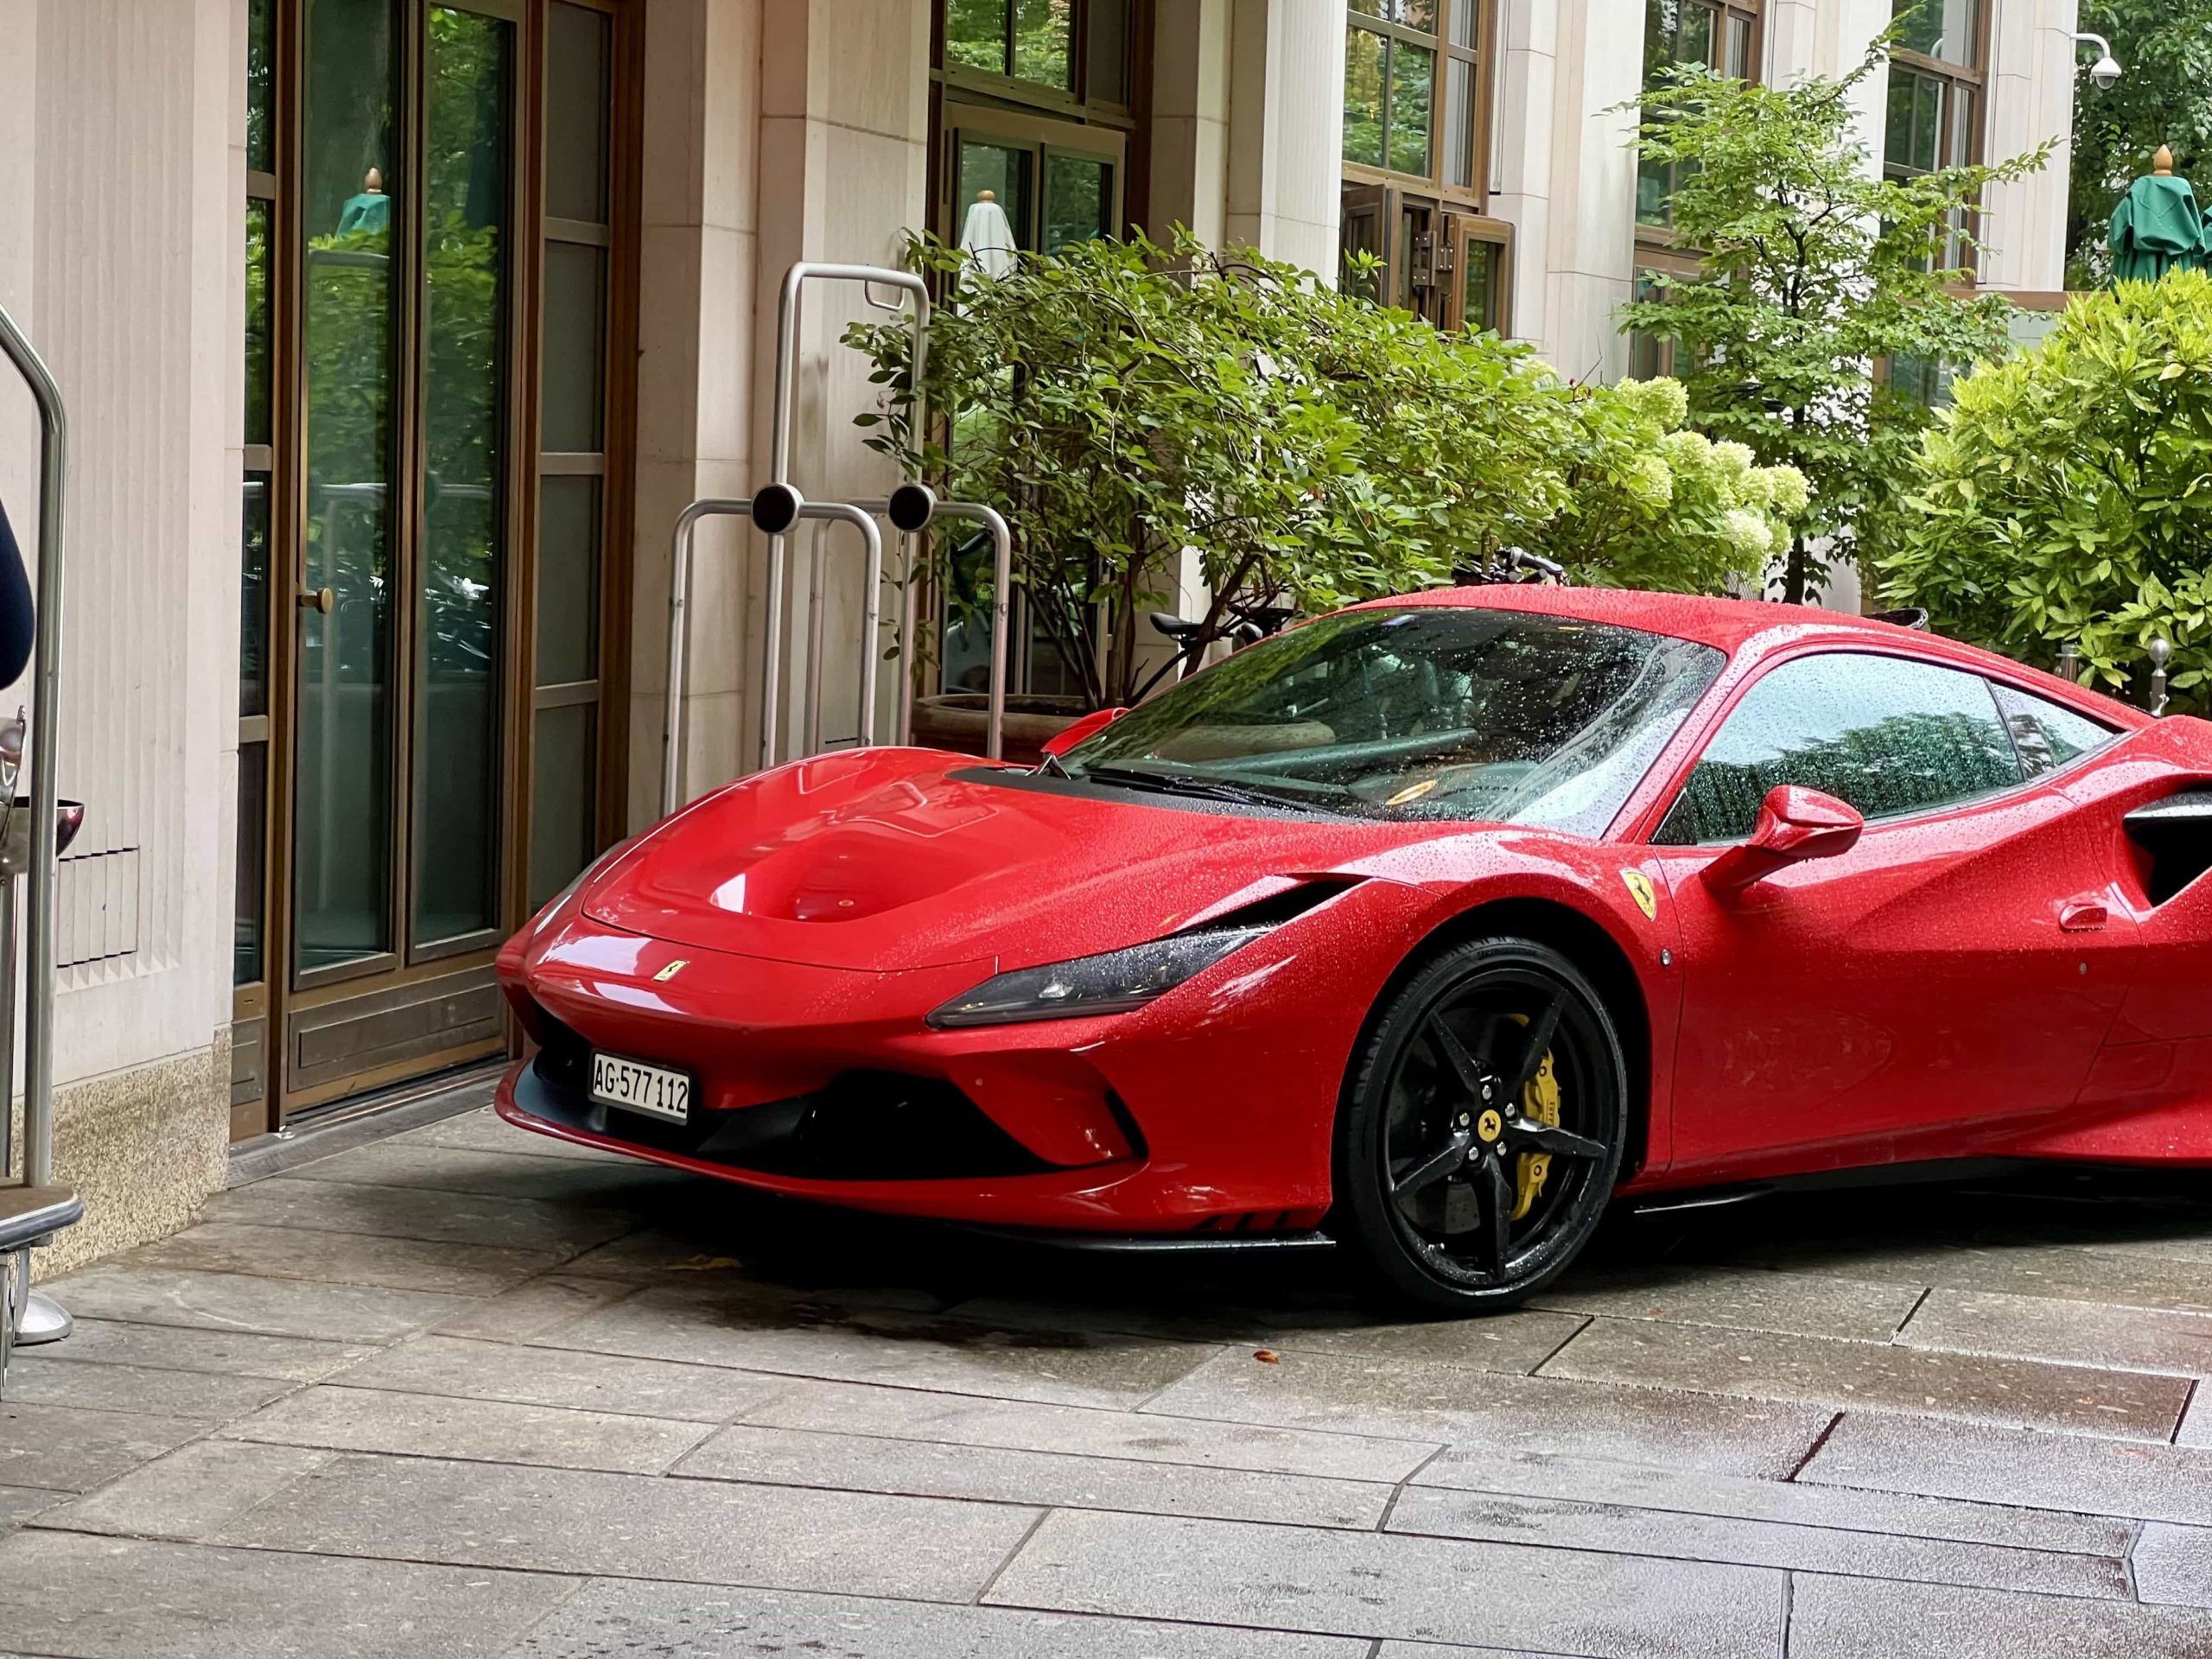 A Ferrari F8 Tributo parked next to the entrance to The Charles Hotel